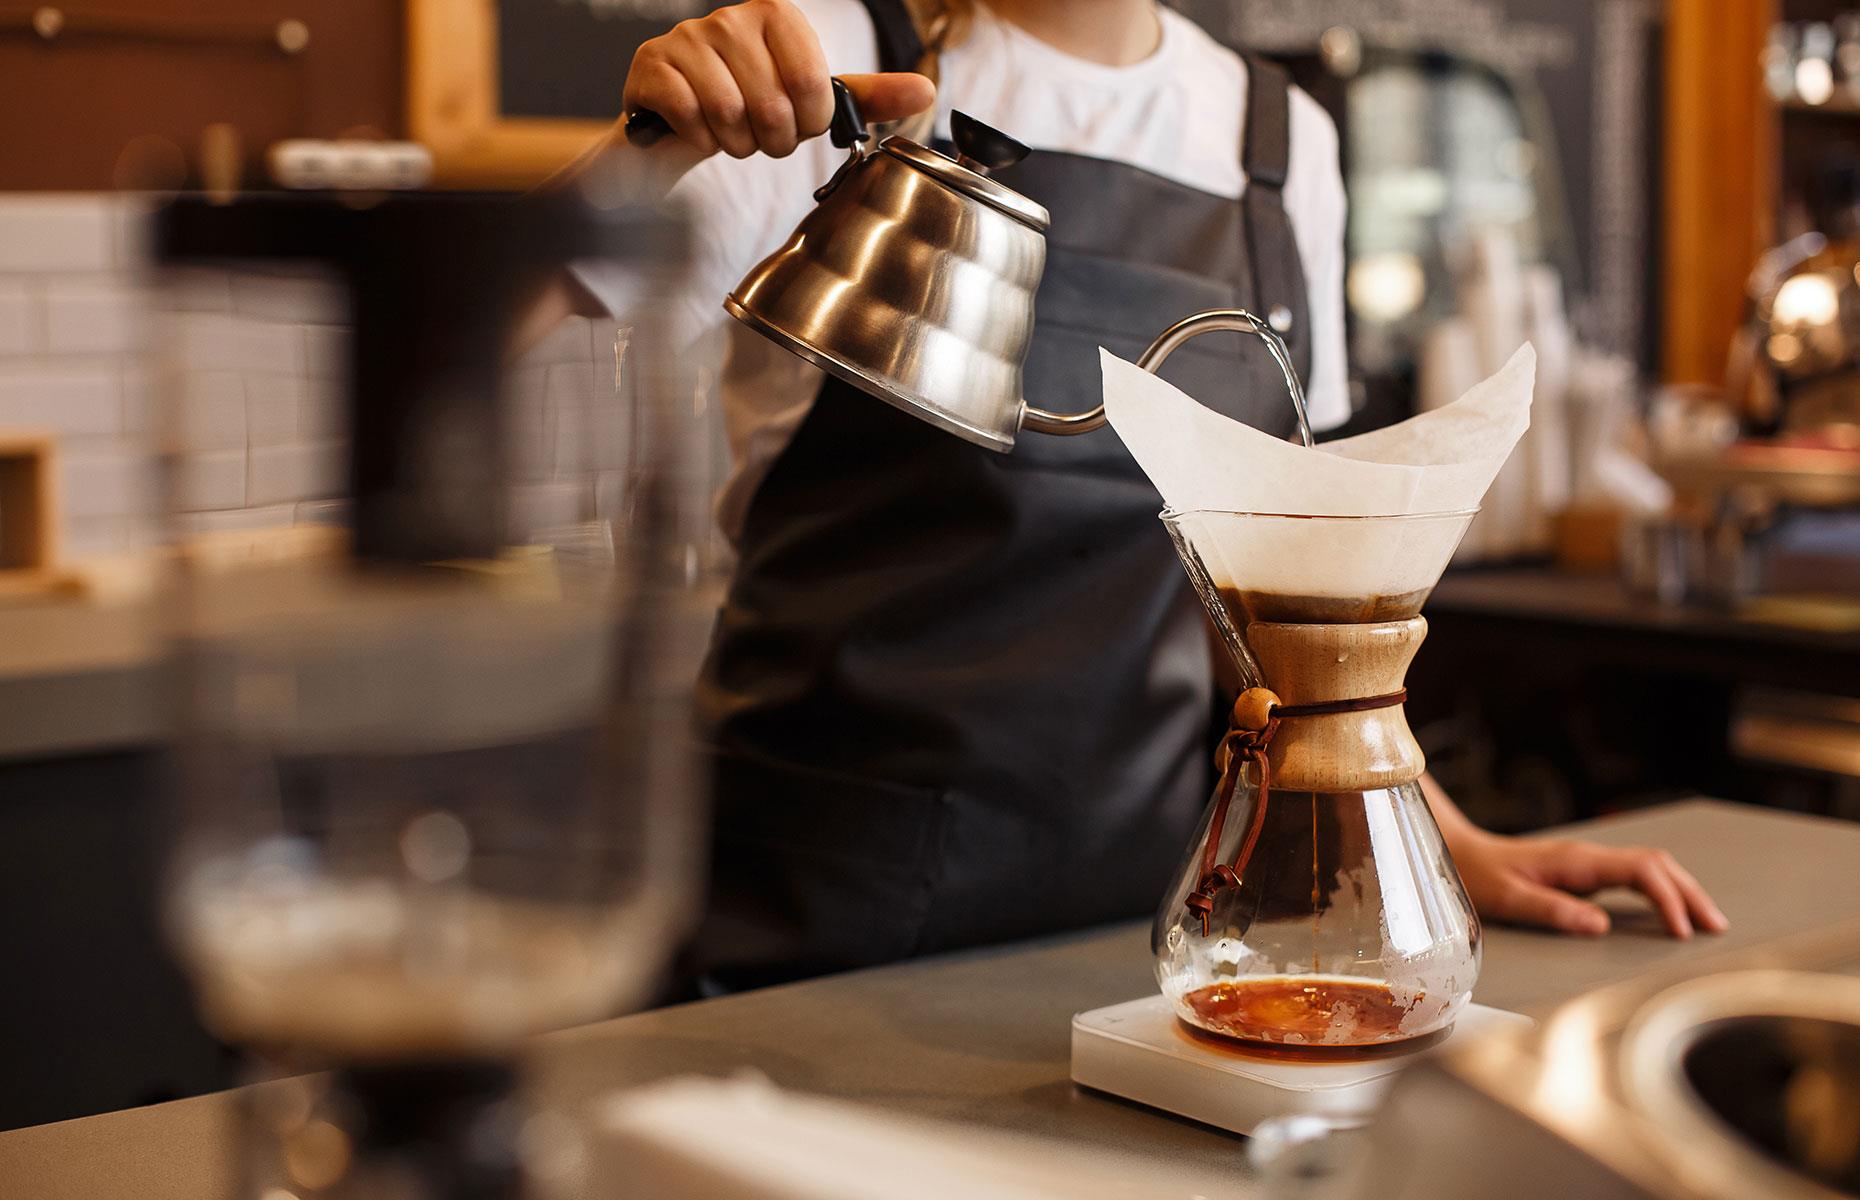 <p>Do you know your ristretto from your macchiato or are you a marvel at mixology? Then you're pretty much guaranteed gainful employment on your overseas travels with experienced baristas and bar staff in demand in vacation destinations, providing you have the right visa of course.</p>  <p><a href="https://www.loveexploring.com/news/116912/etias-visa-european-union-travel"><strong>Here's how to make sense of the new European travel visa</strong></a></p>